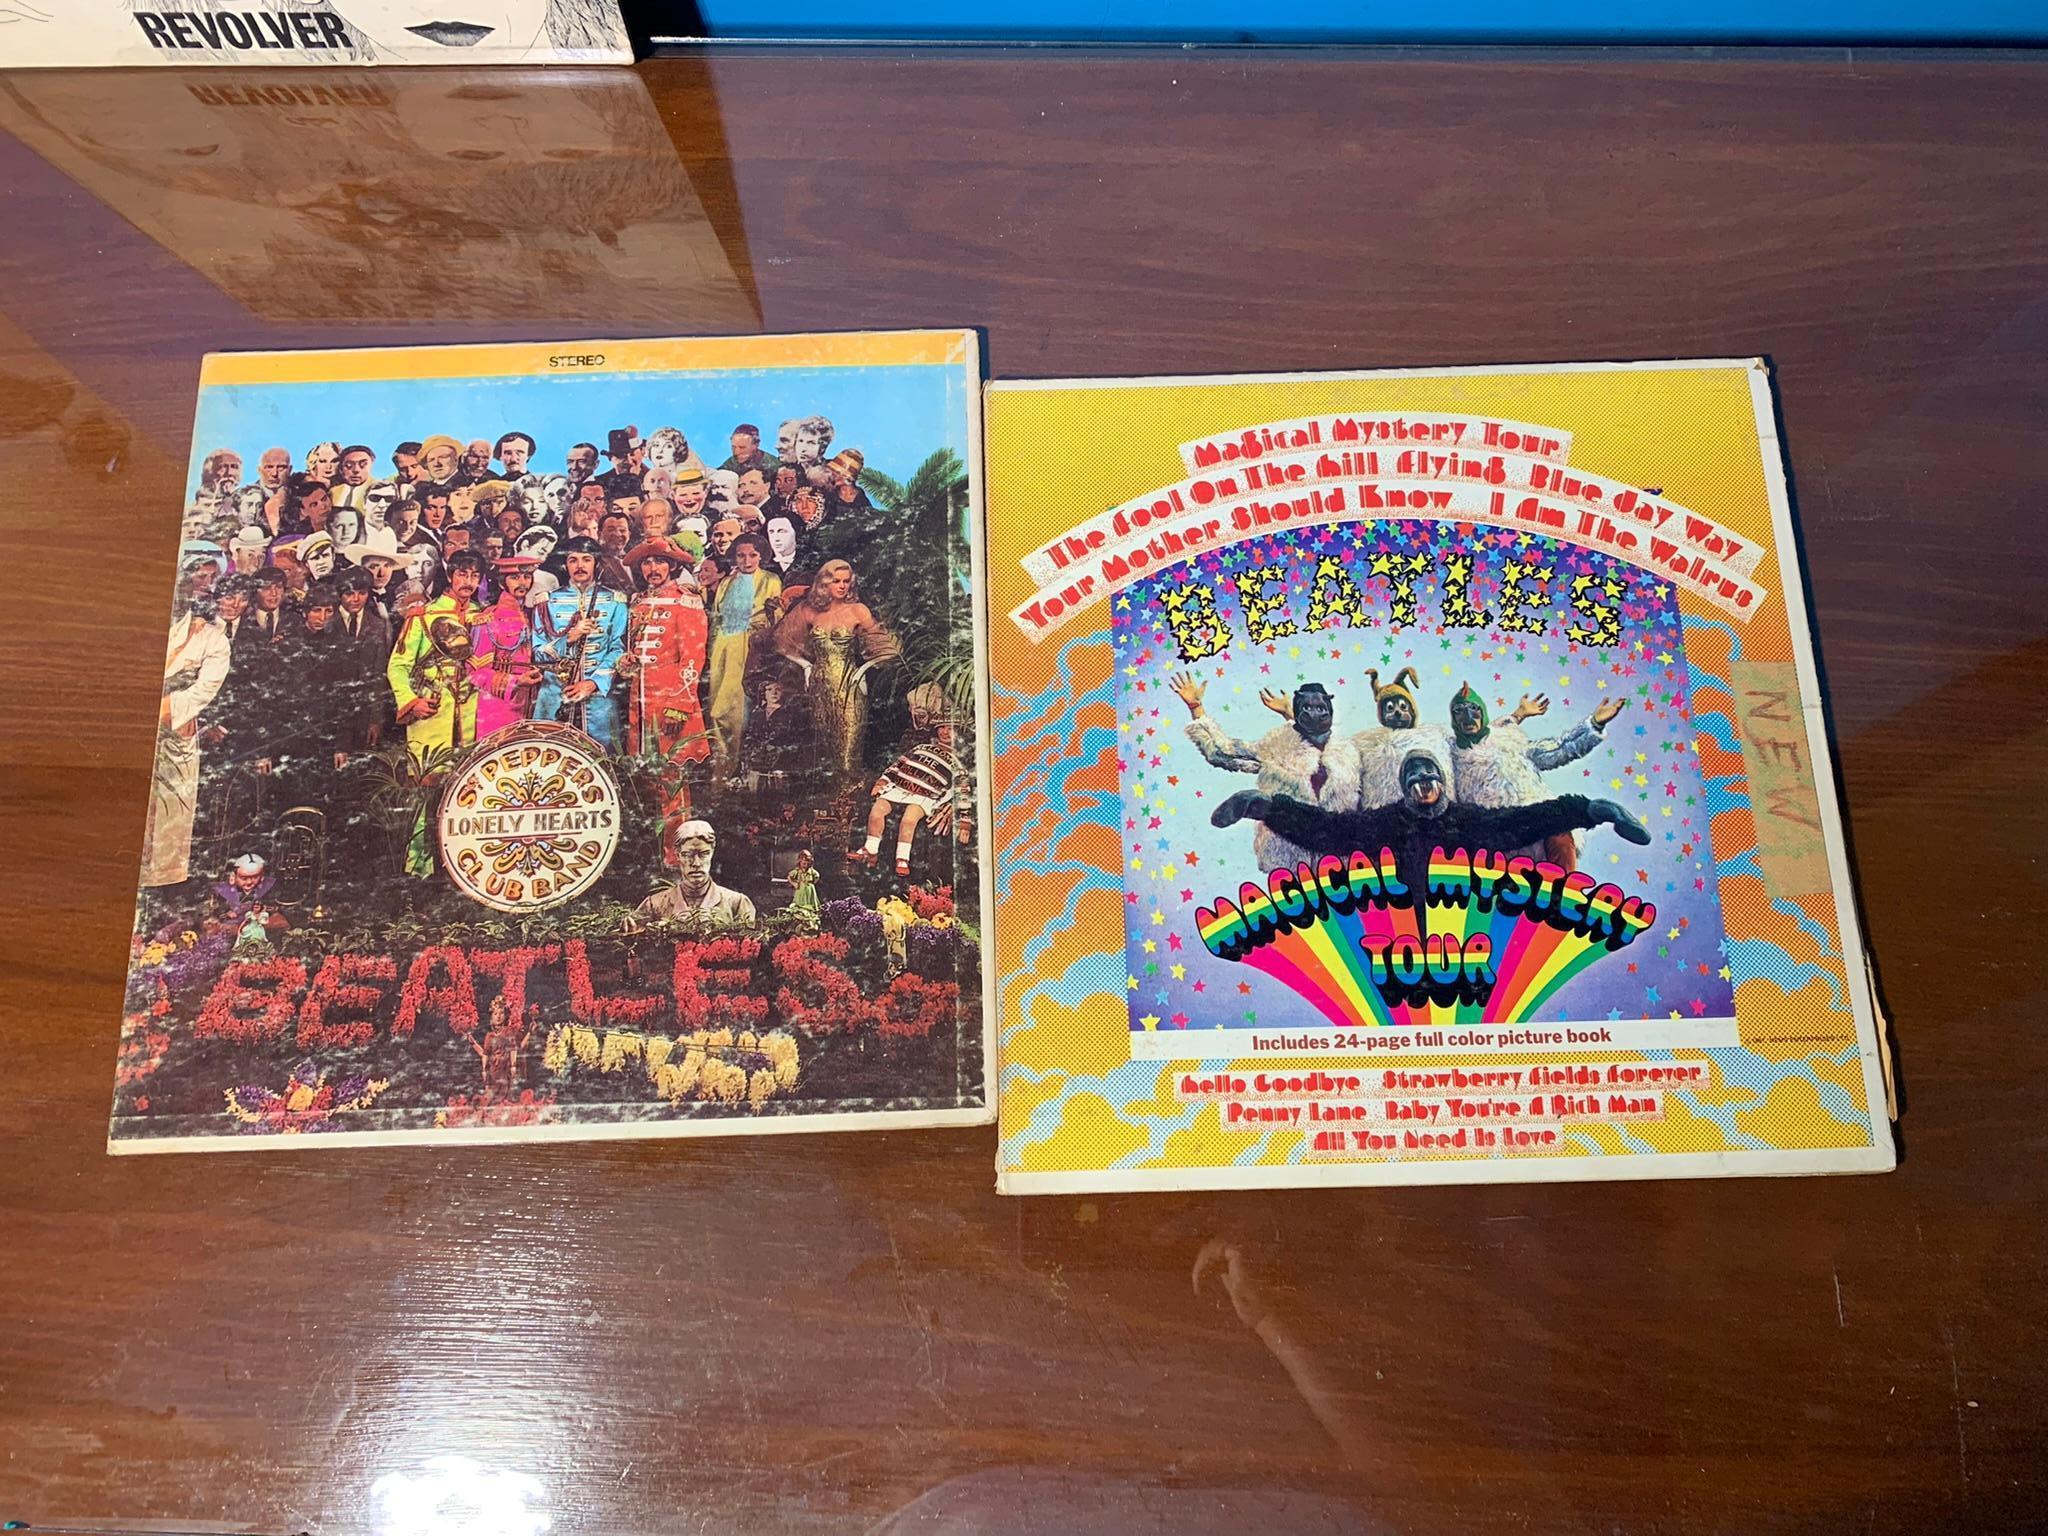 Group of 15 Records - The Beatles, Donovan, Steppenwolf & More